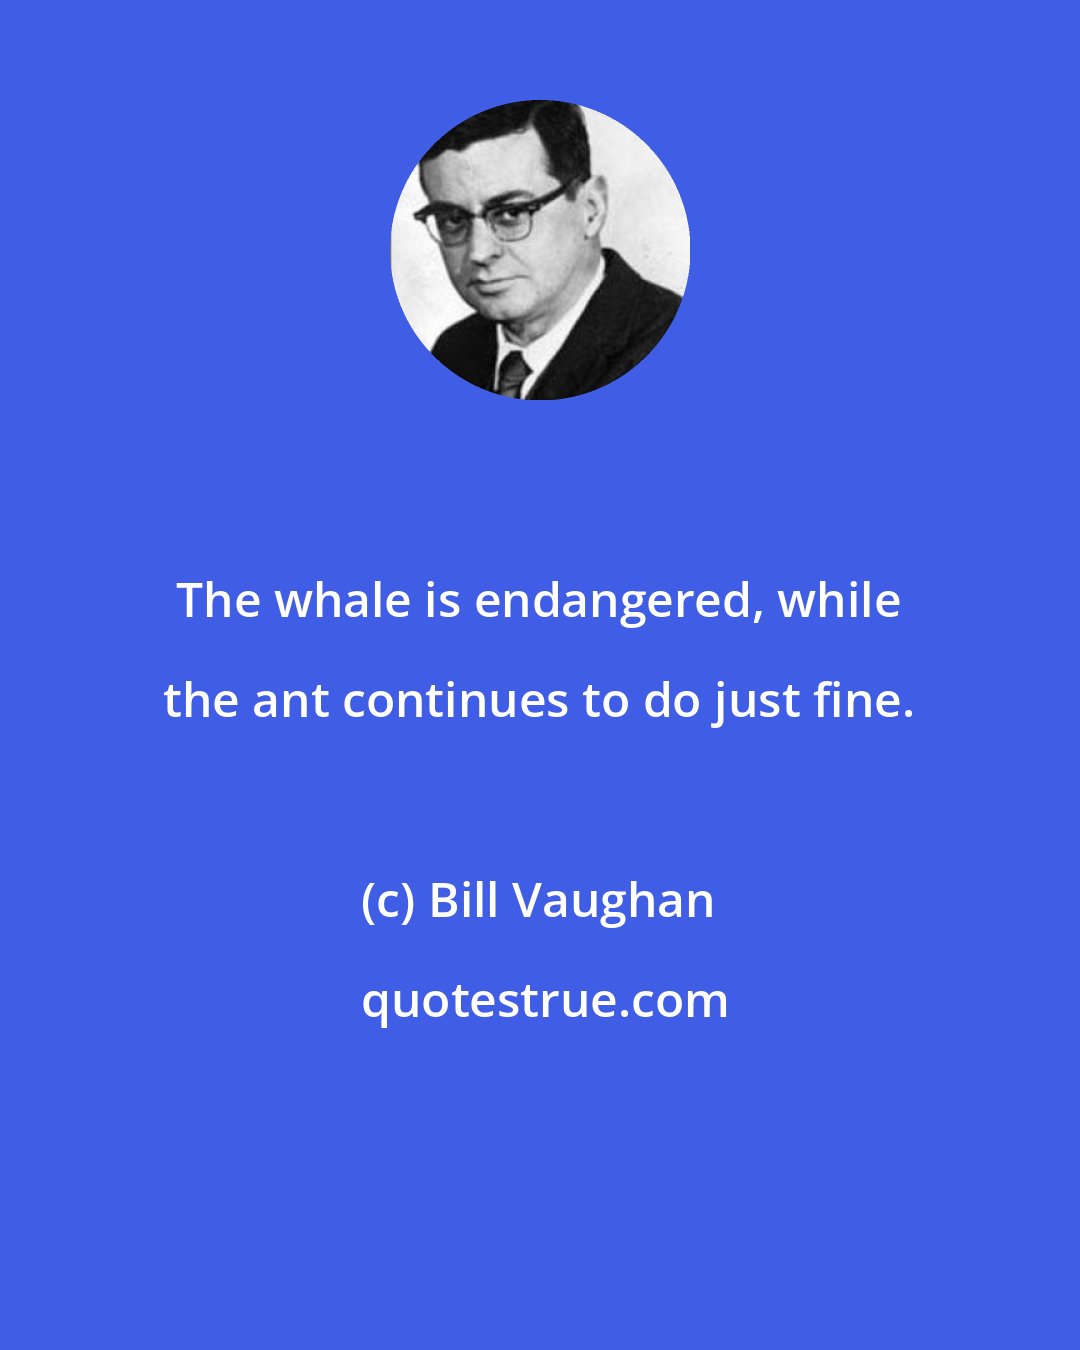 Bill Vaughan: The whale is endangered, while the ant continues to do just fine.